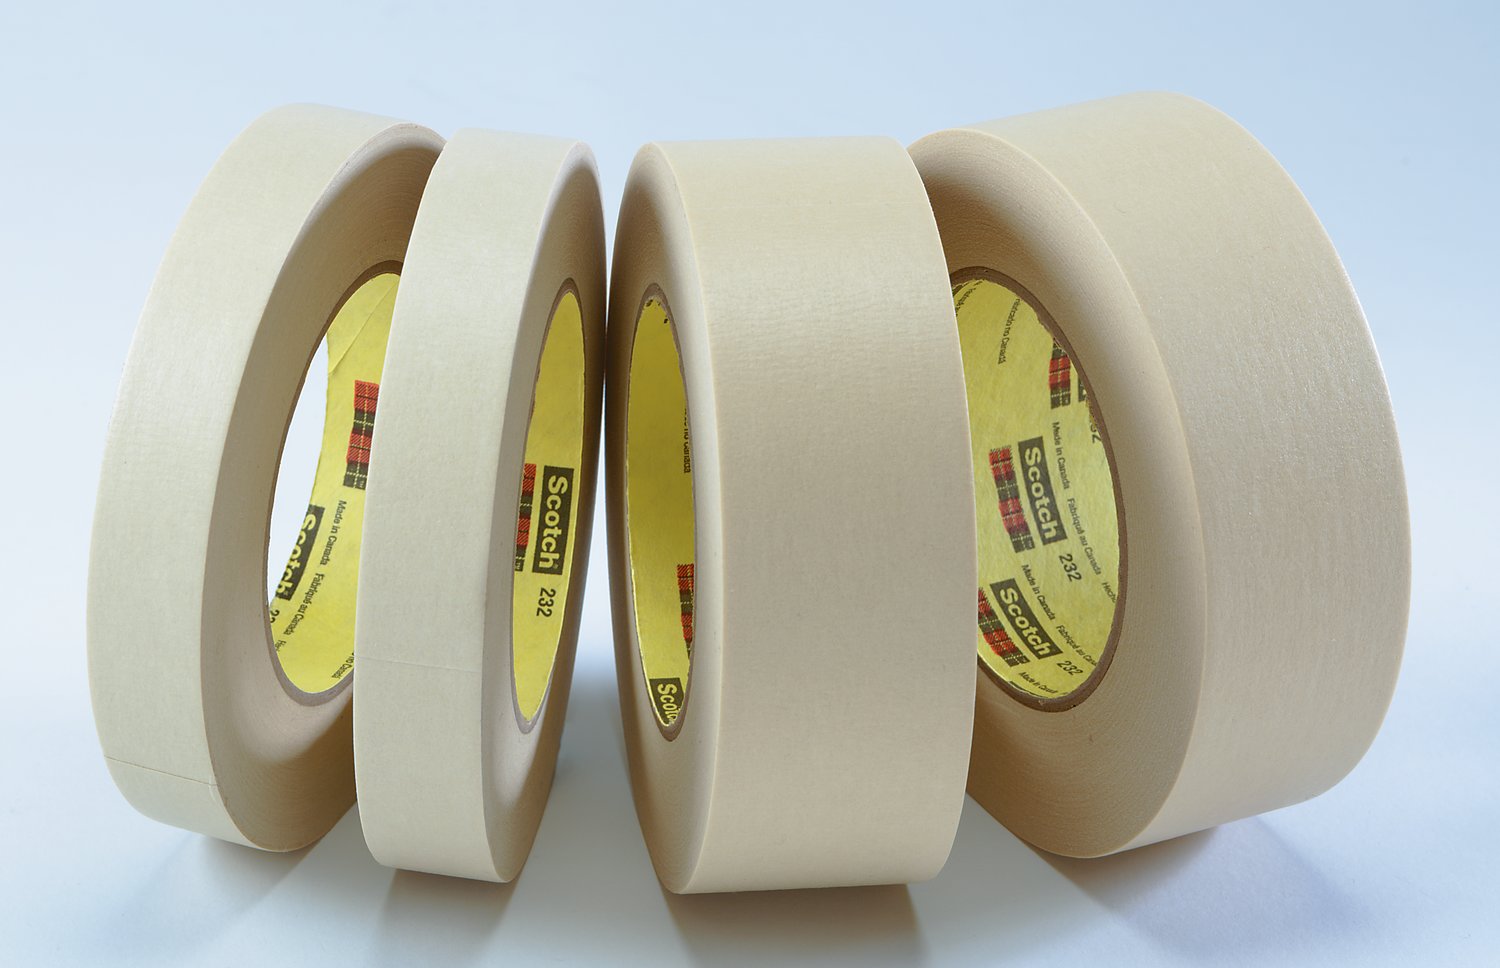 7010373484 - 3M High Performance Masking Tape 232, Tan, 1/8 in x 60 yd, 6.3 mil,
plastic core, 288/Case